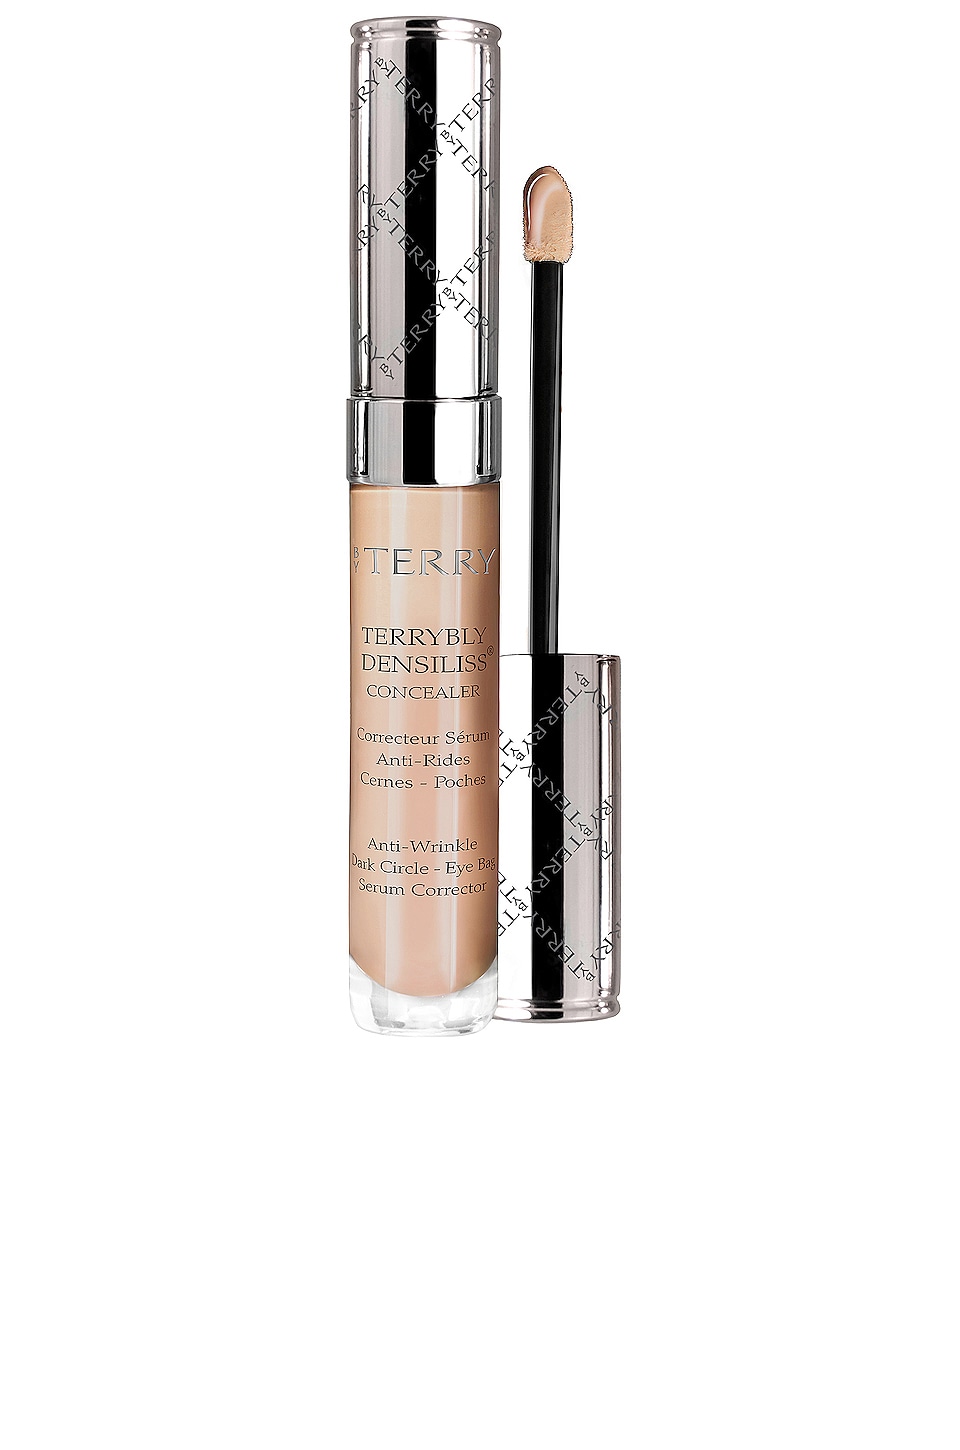 Консилер By Terry Terrybly Densiliss, цвет Desert Beige by terry консилер terrybly densiliss concealer оттенок 3 natural beige